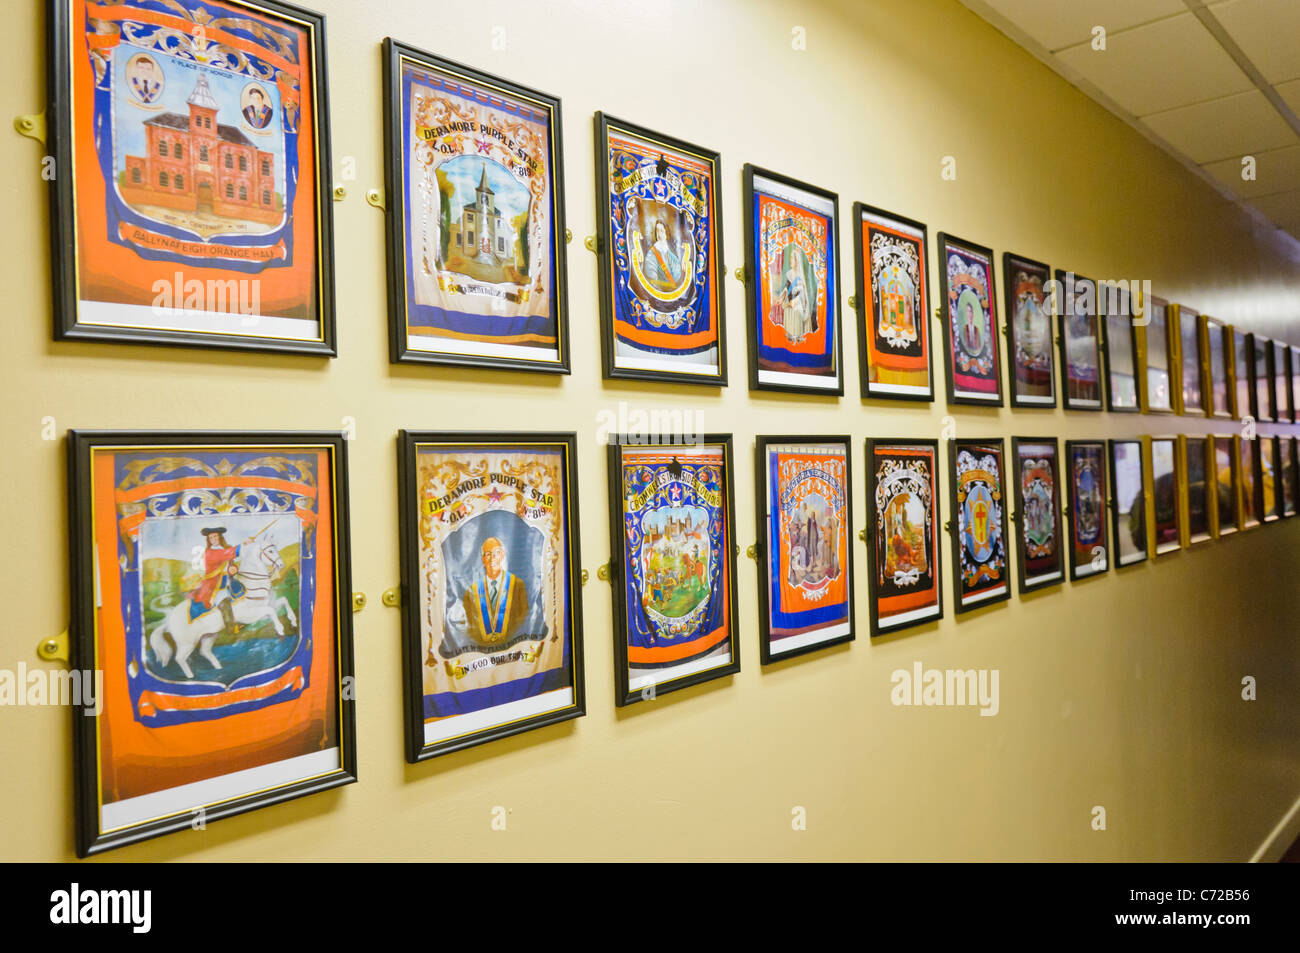 Wall in an Orange Hall with photographs of Orange Banners Stock Photo